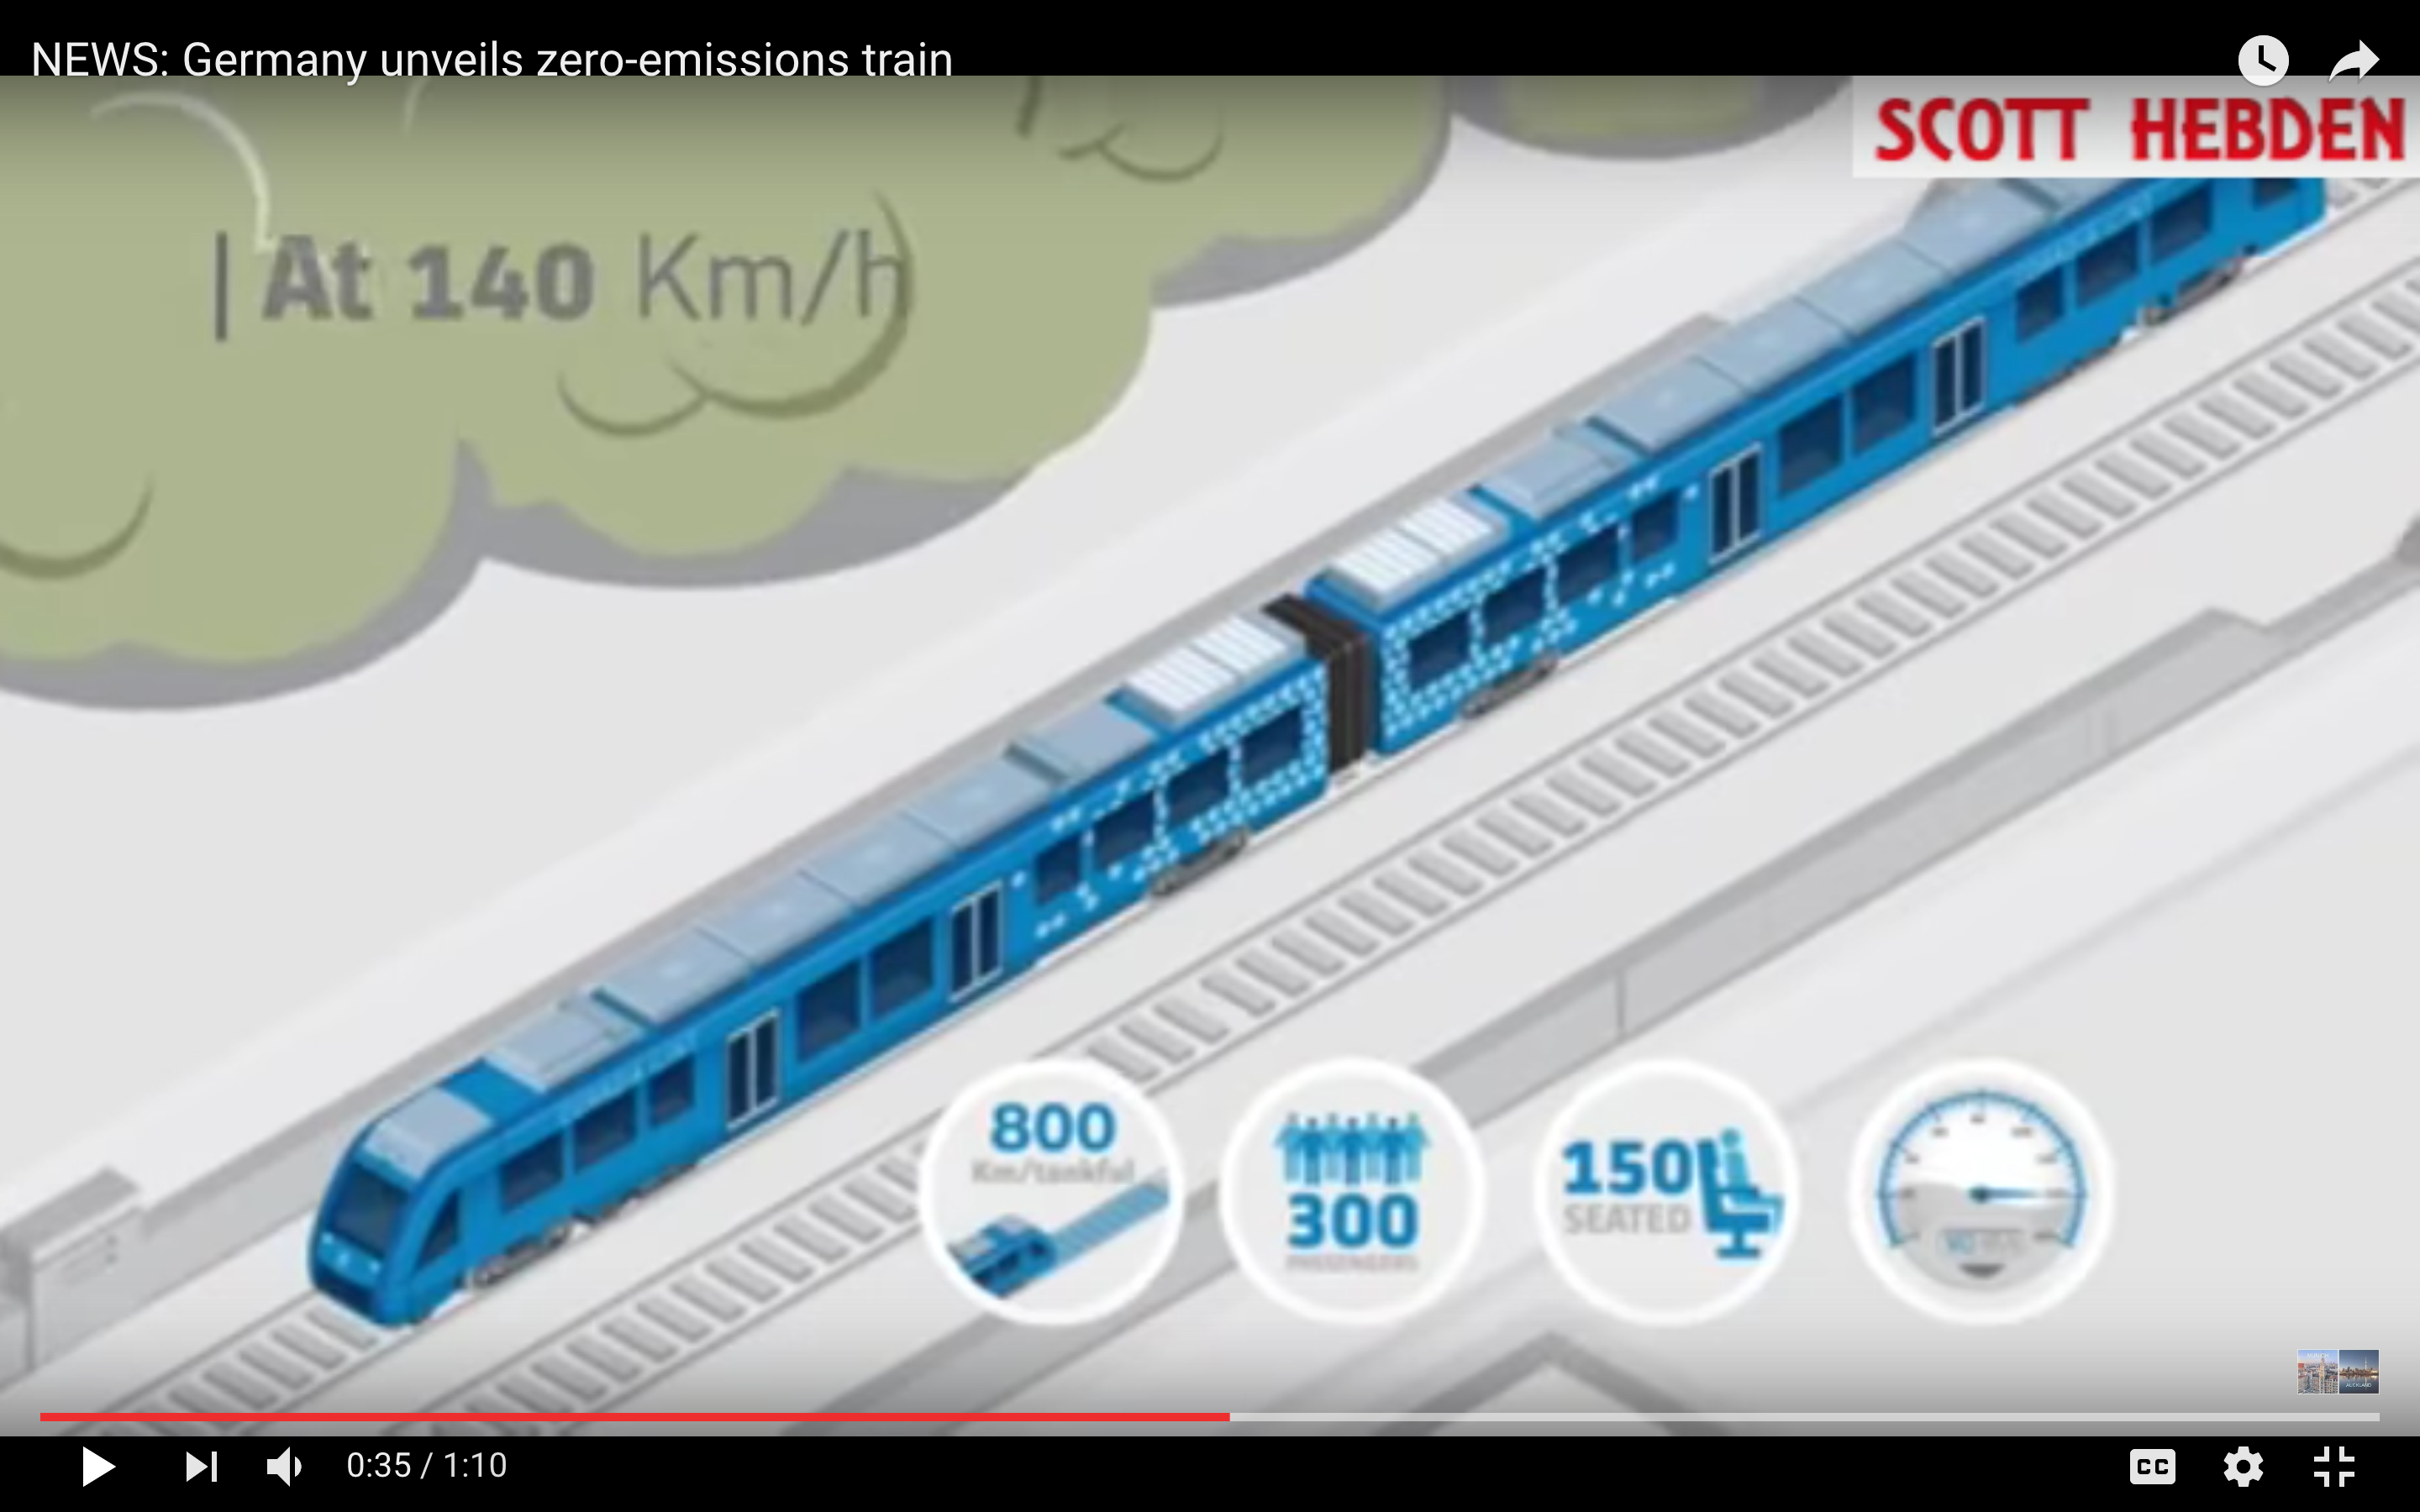 Germany Unveils Zero Emissions Train that Only Emits Water